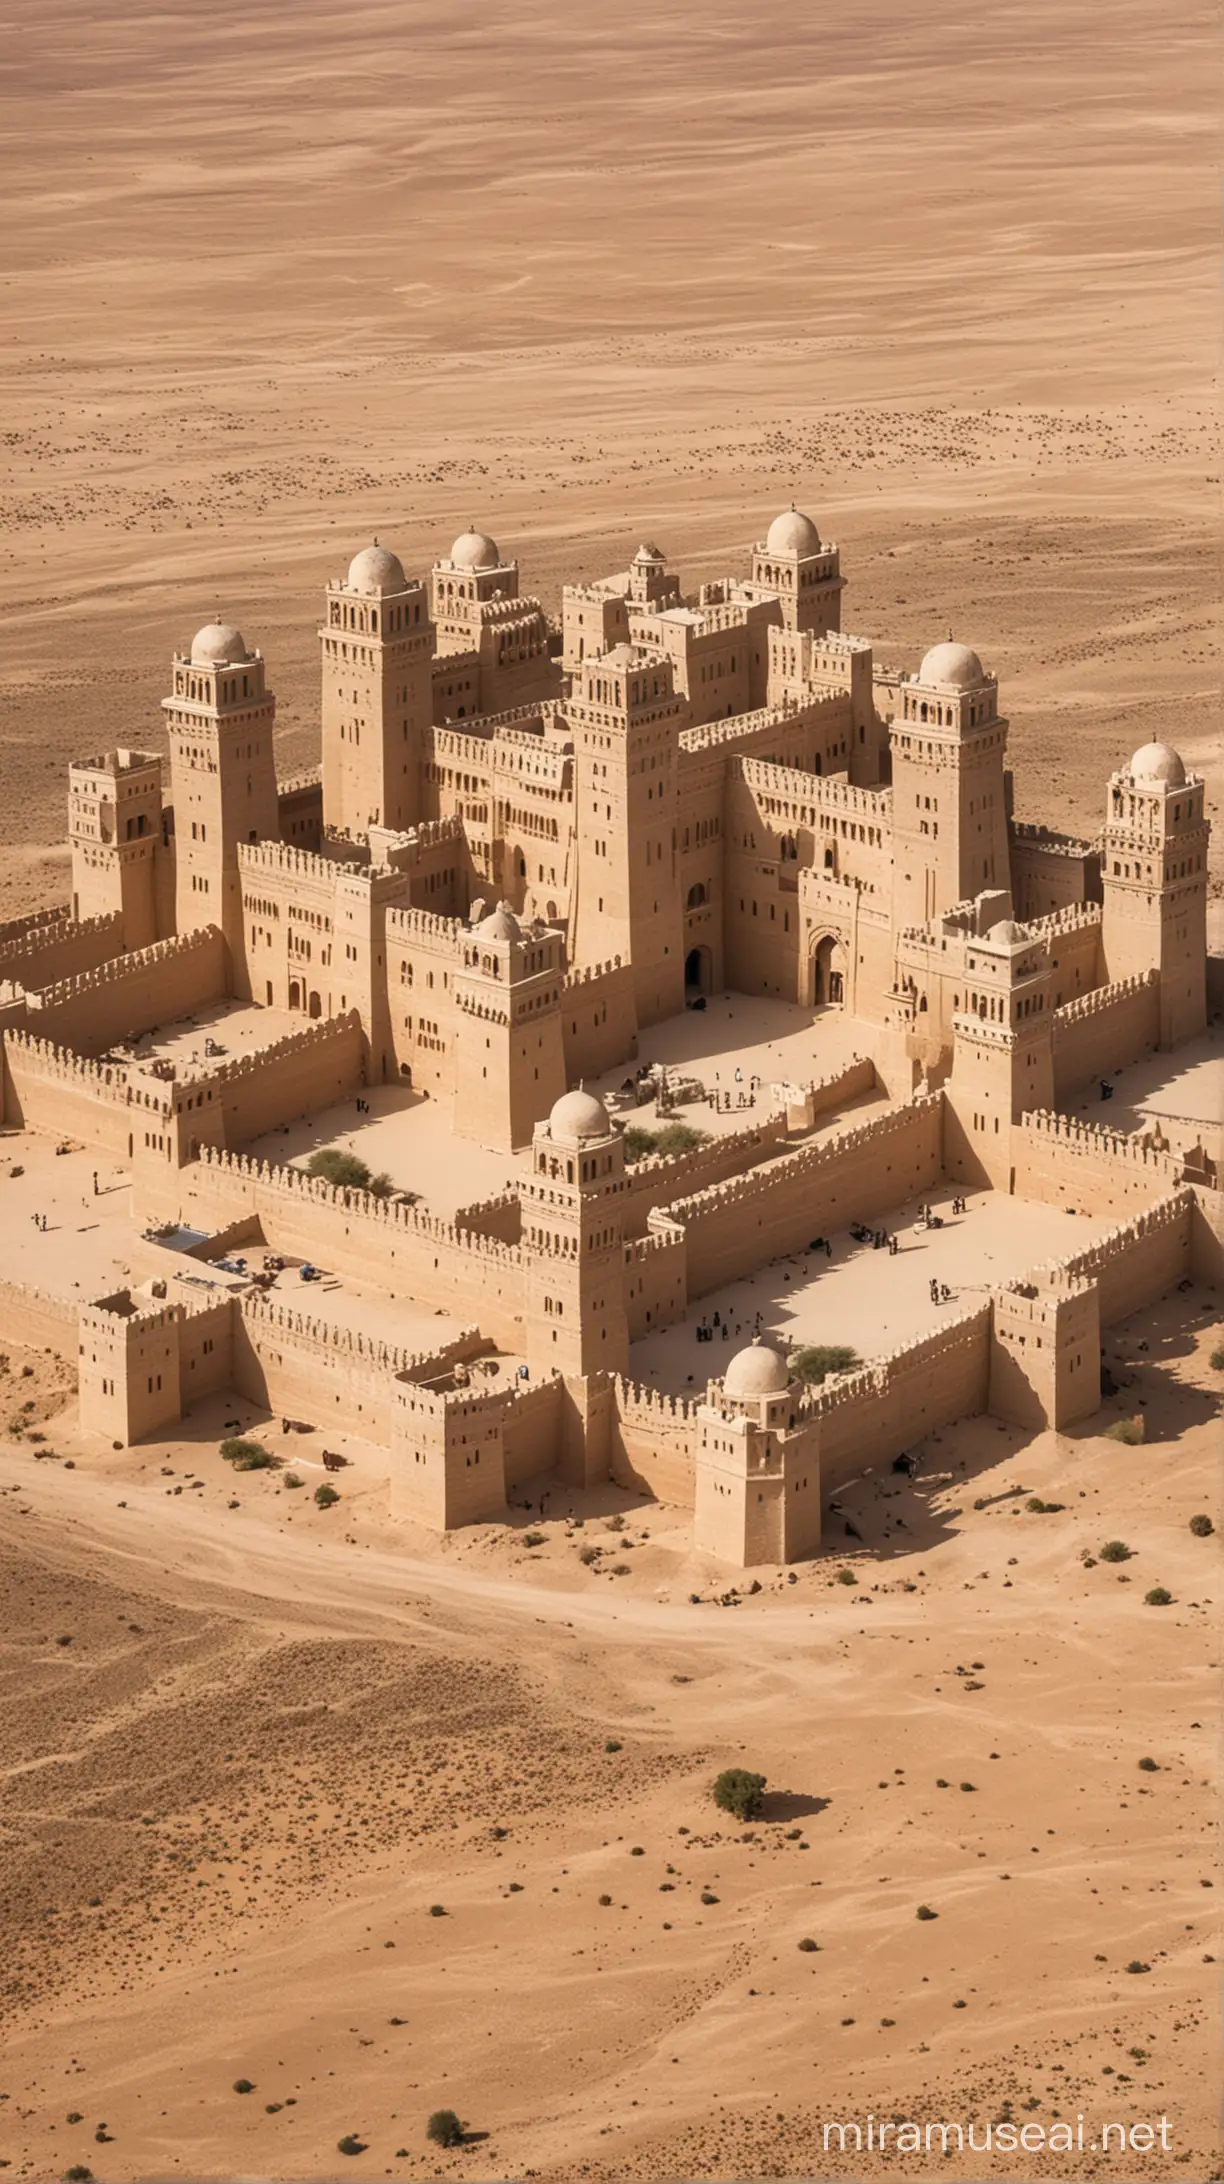 Desert Palace with Towering Walls Majestic Fortress Amidst the Sand